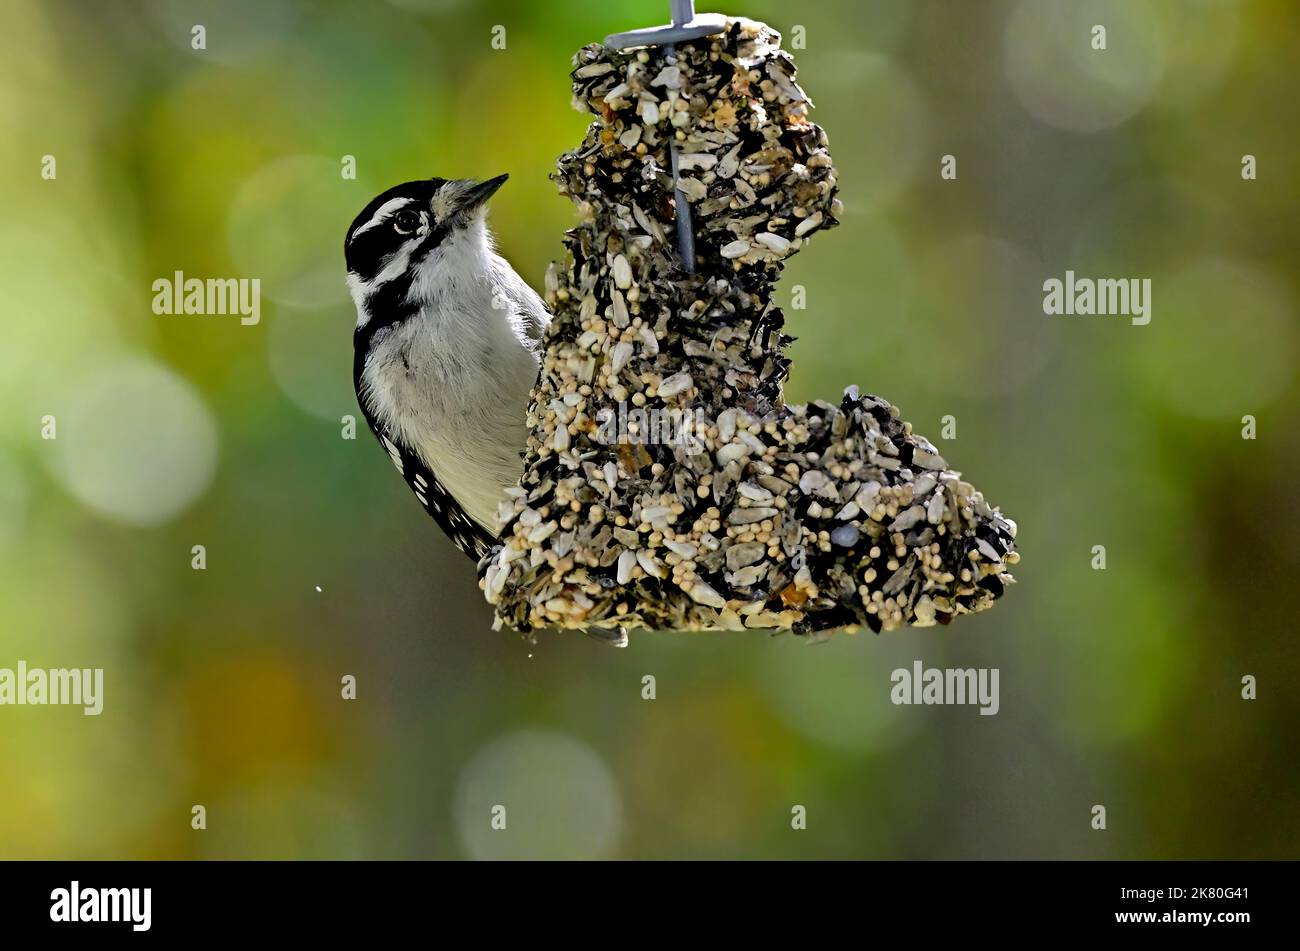 A Downey woodpecker ' Picoides pubescens', pecking on a hanging bird feeder in rural Alberta Canada. Stock Photo